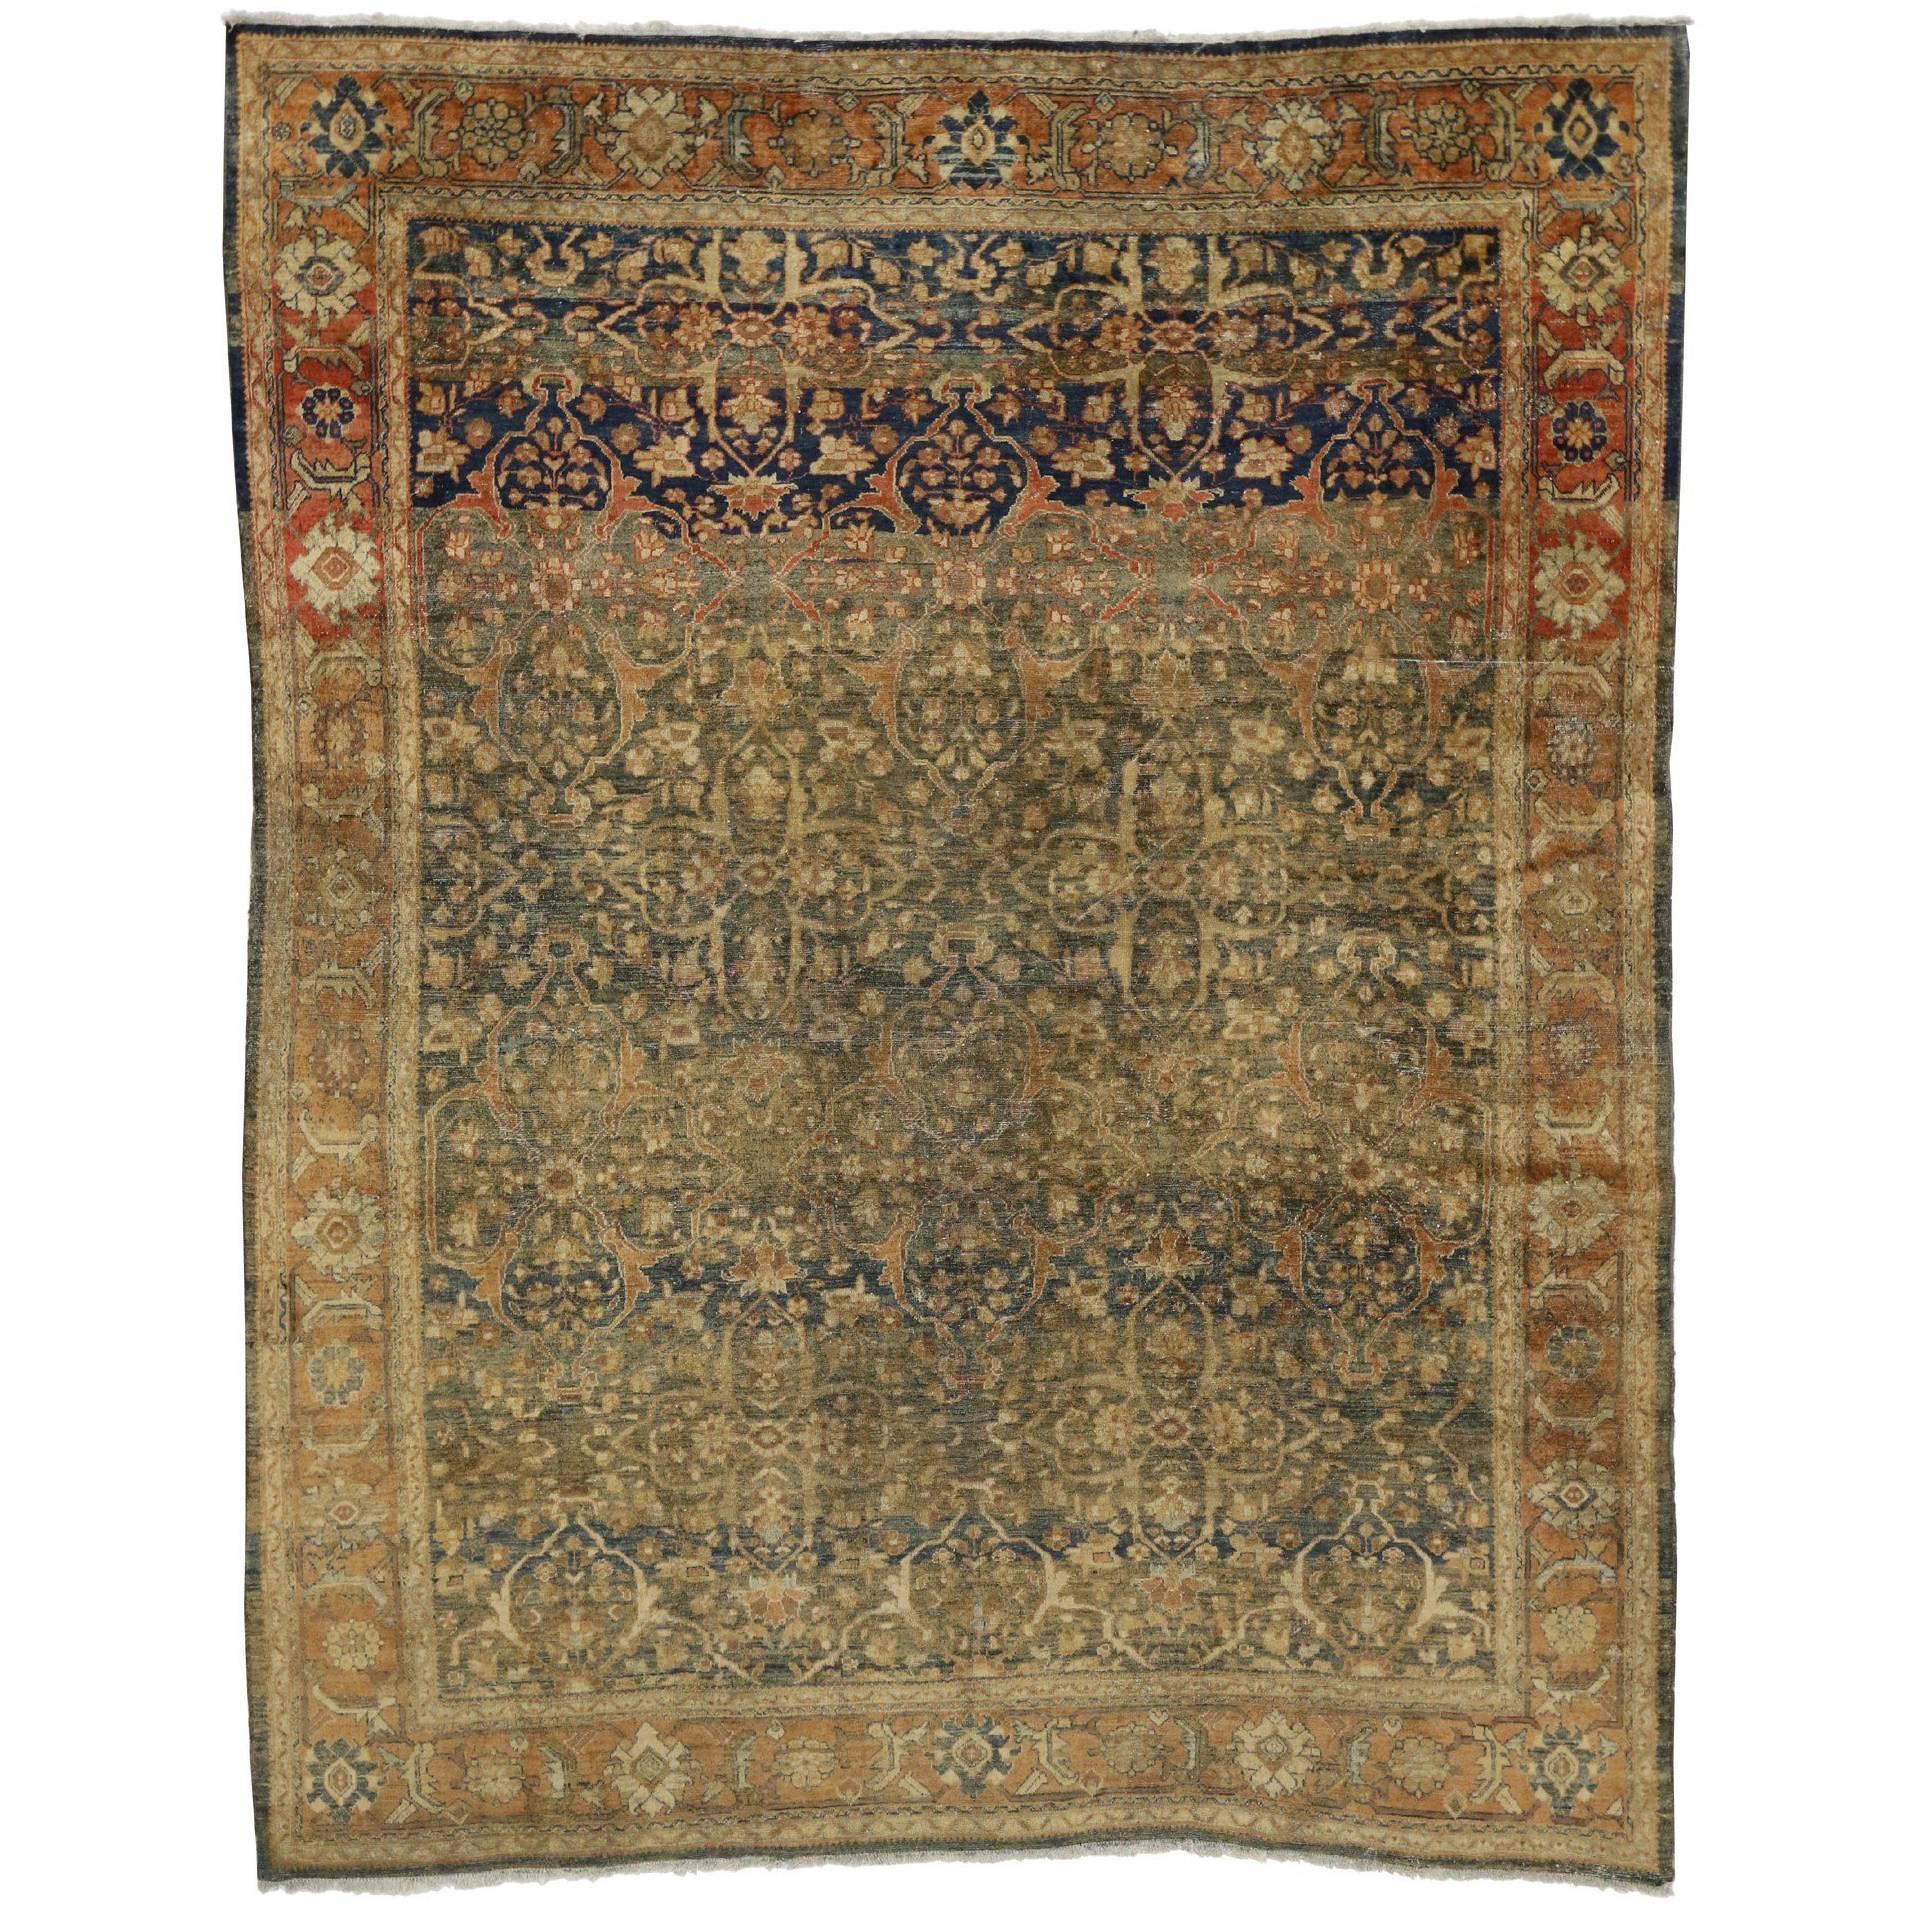 Distressed Antique Persian Mahal Rug with Rustic English Traditional Style